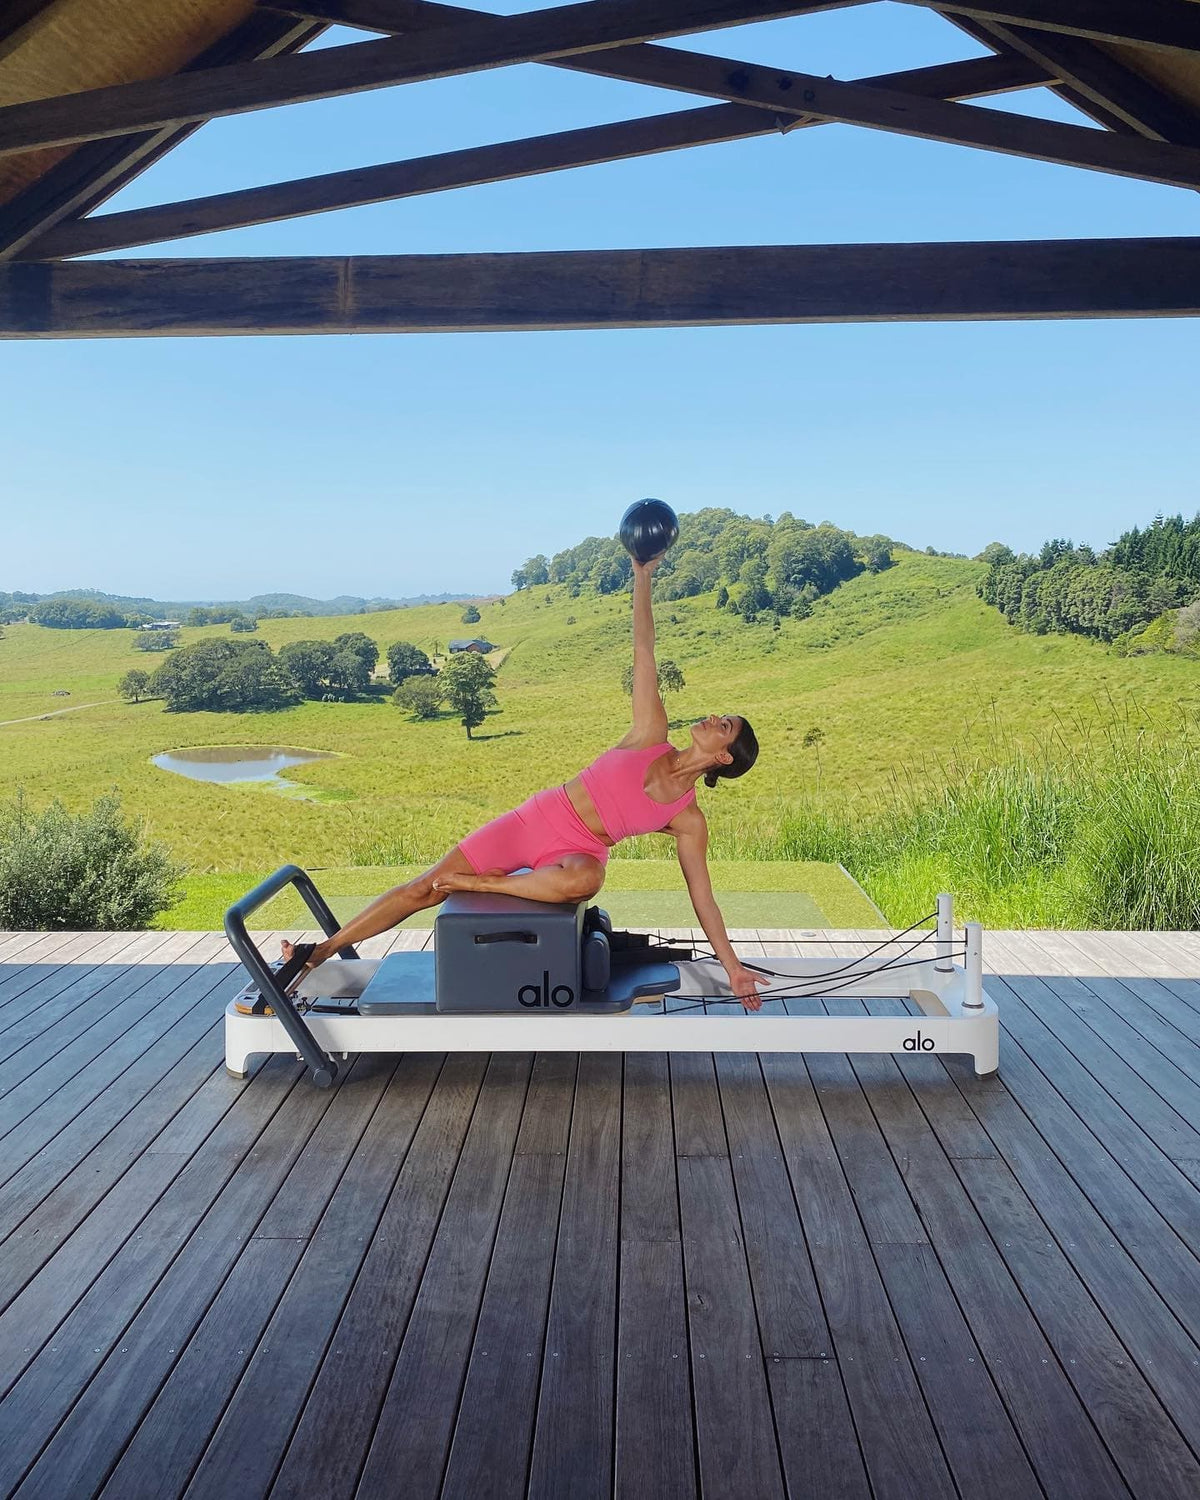 Take the Pilates Reformer to your Mat” NEW CLASS UPLOAD on